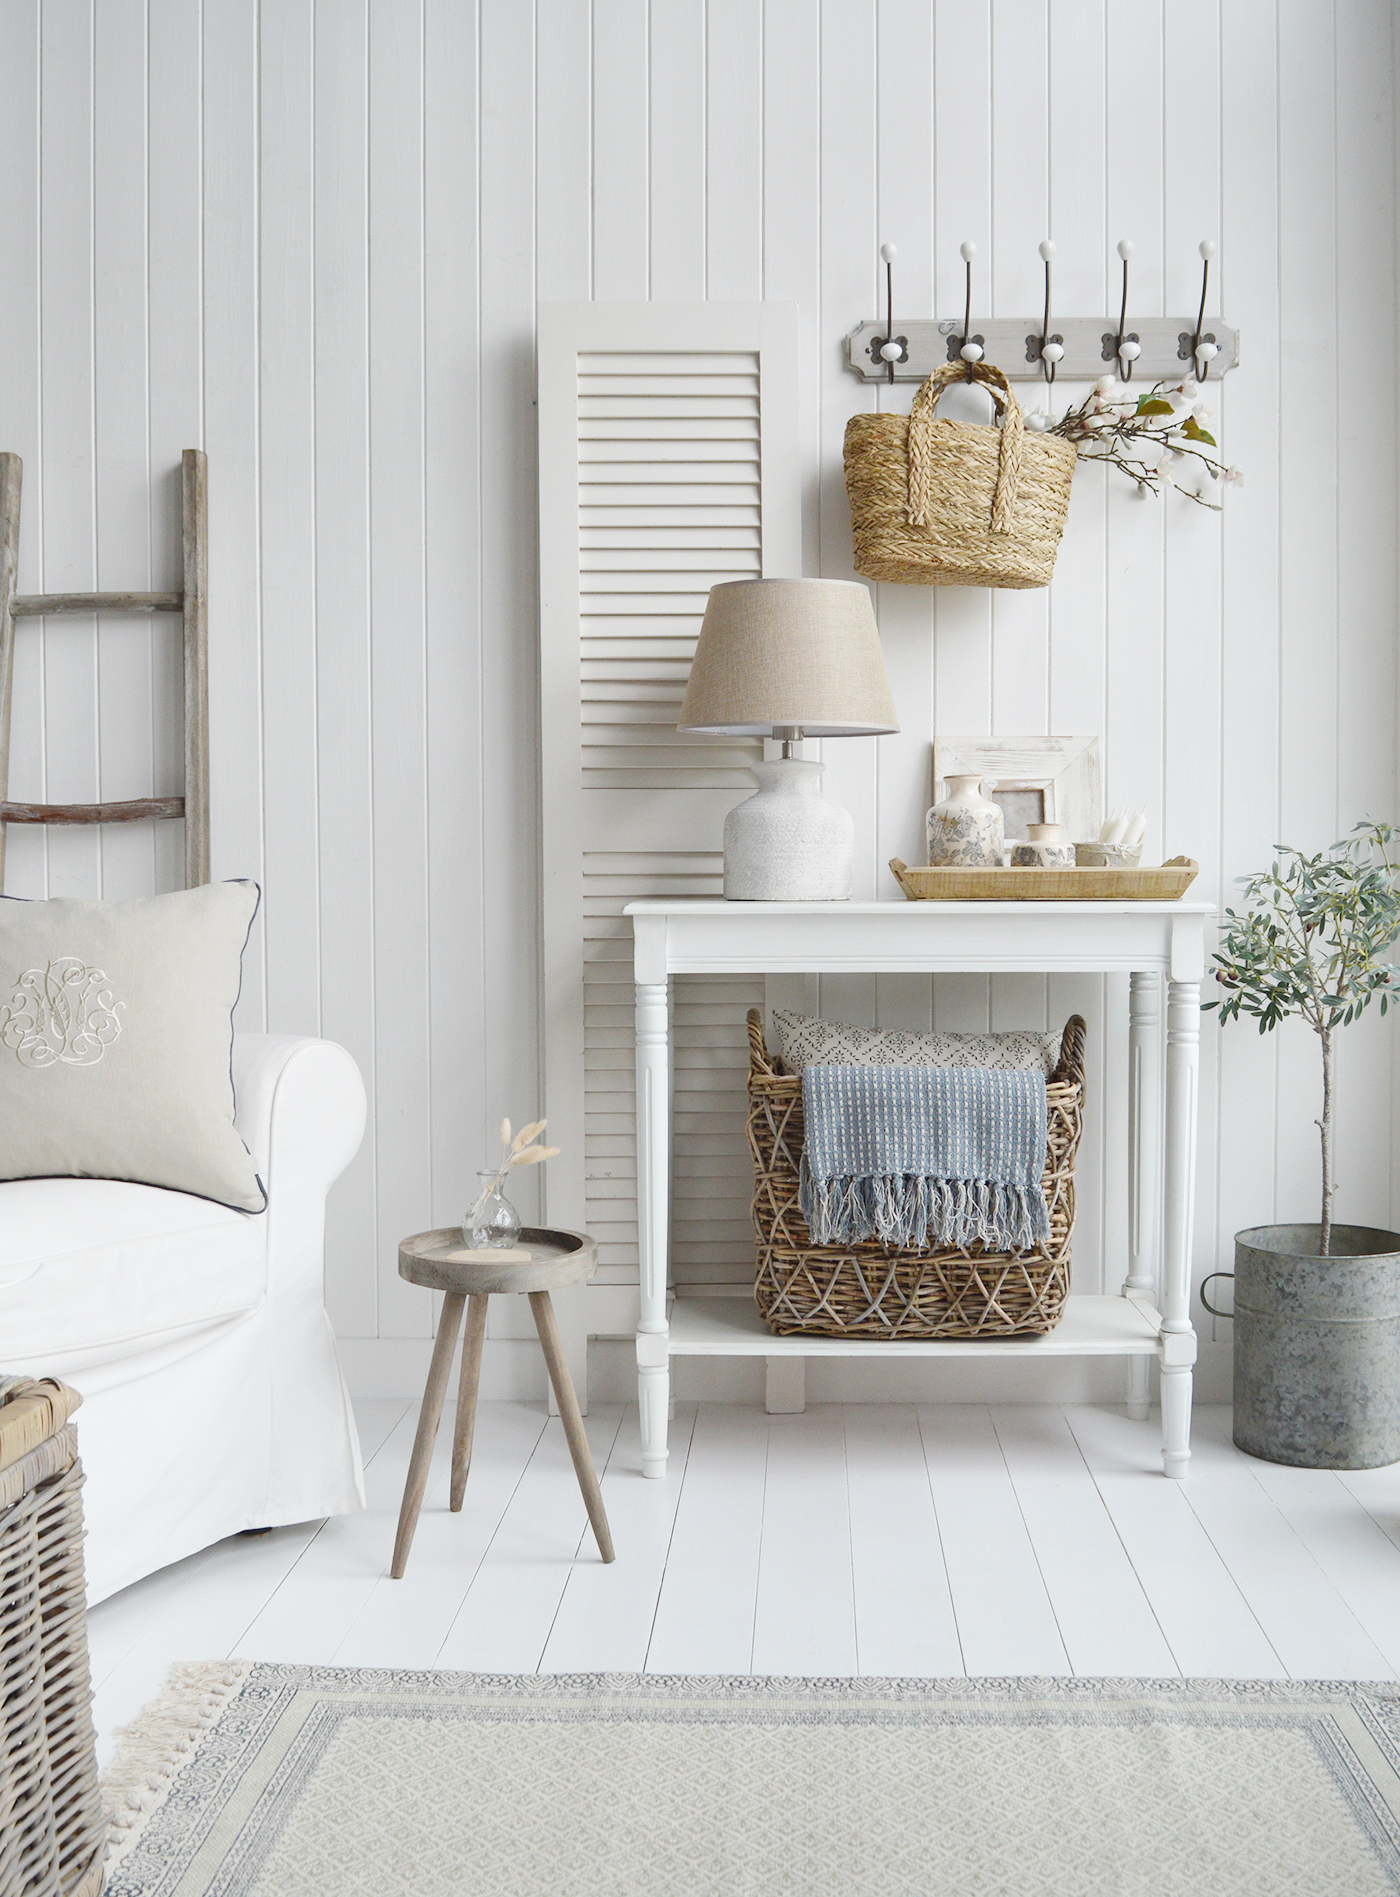 New England hallway furniture for coastal, modern farmhouse and country homes in the UK. The Cape Ann range of white furniture, versatile and match various colour schemes